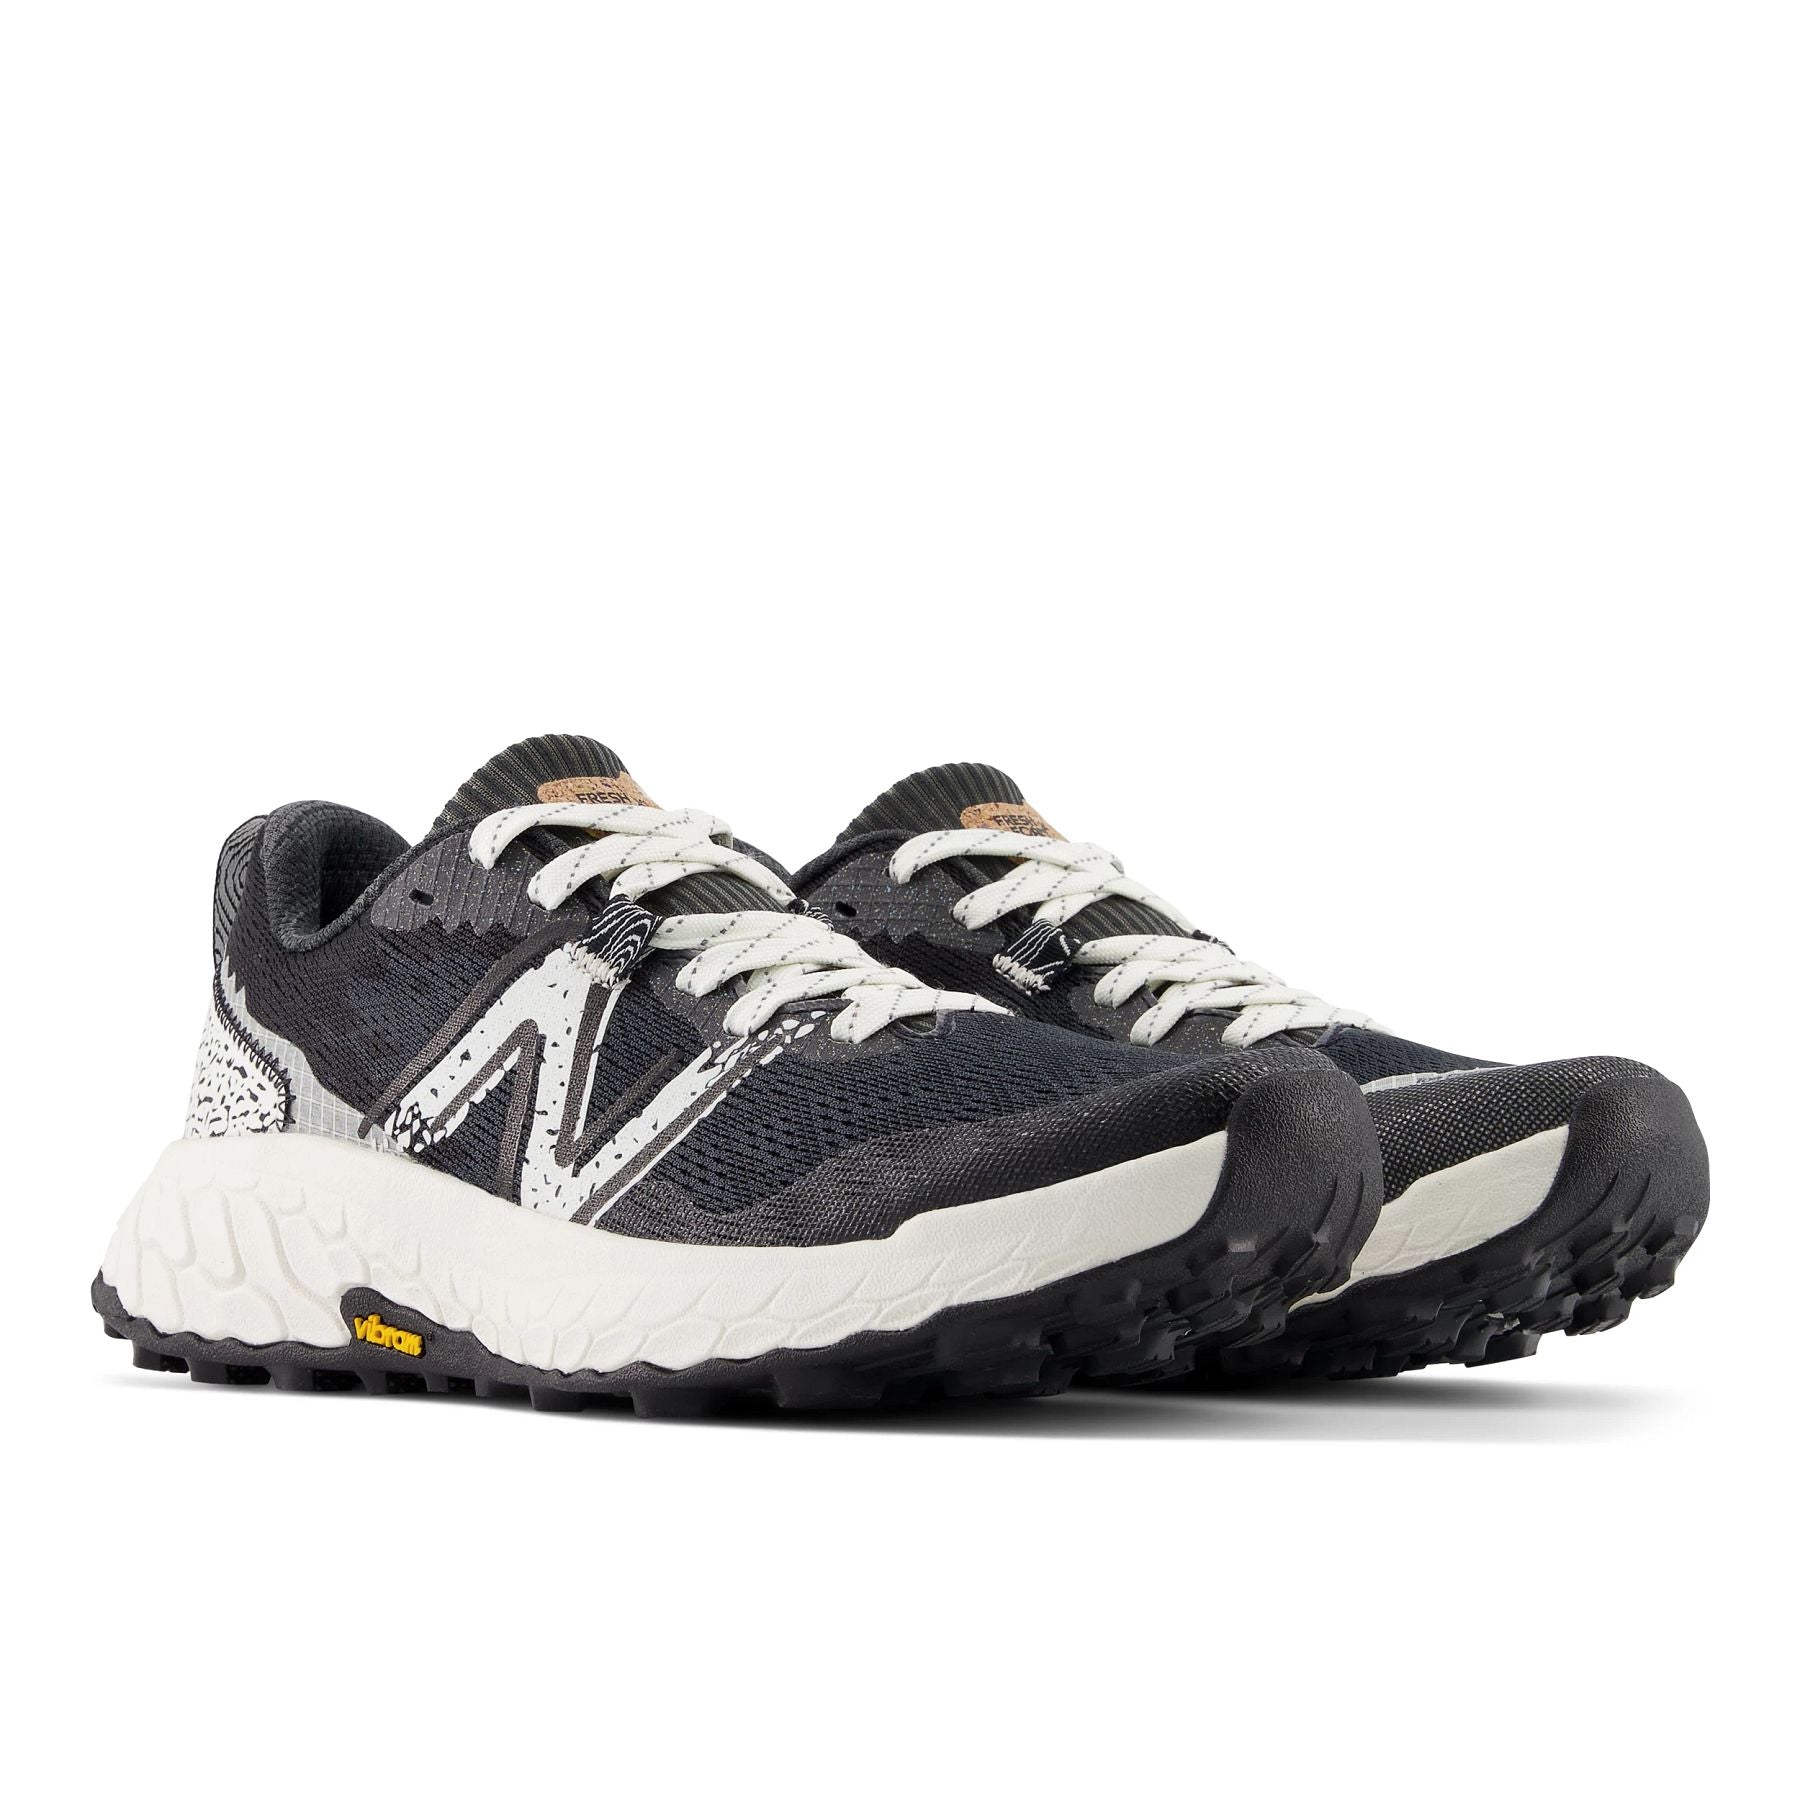 Front angle view of the Women's Hierro V7 trail shoe by New Balance in the color Blactop/Sea Salt